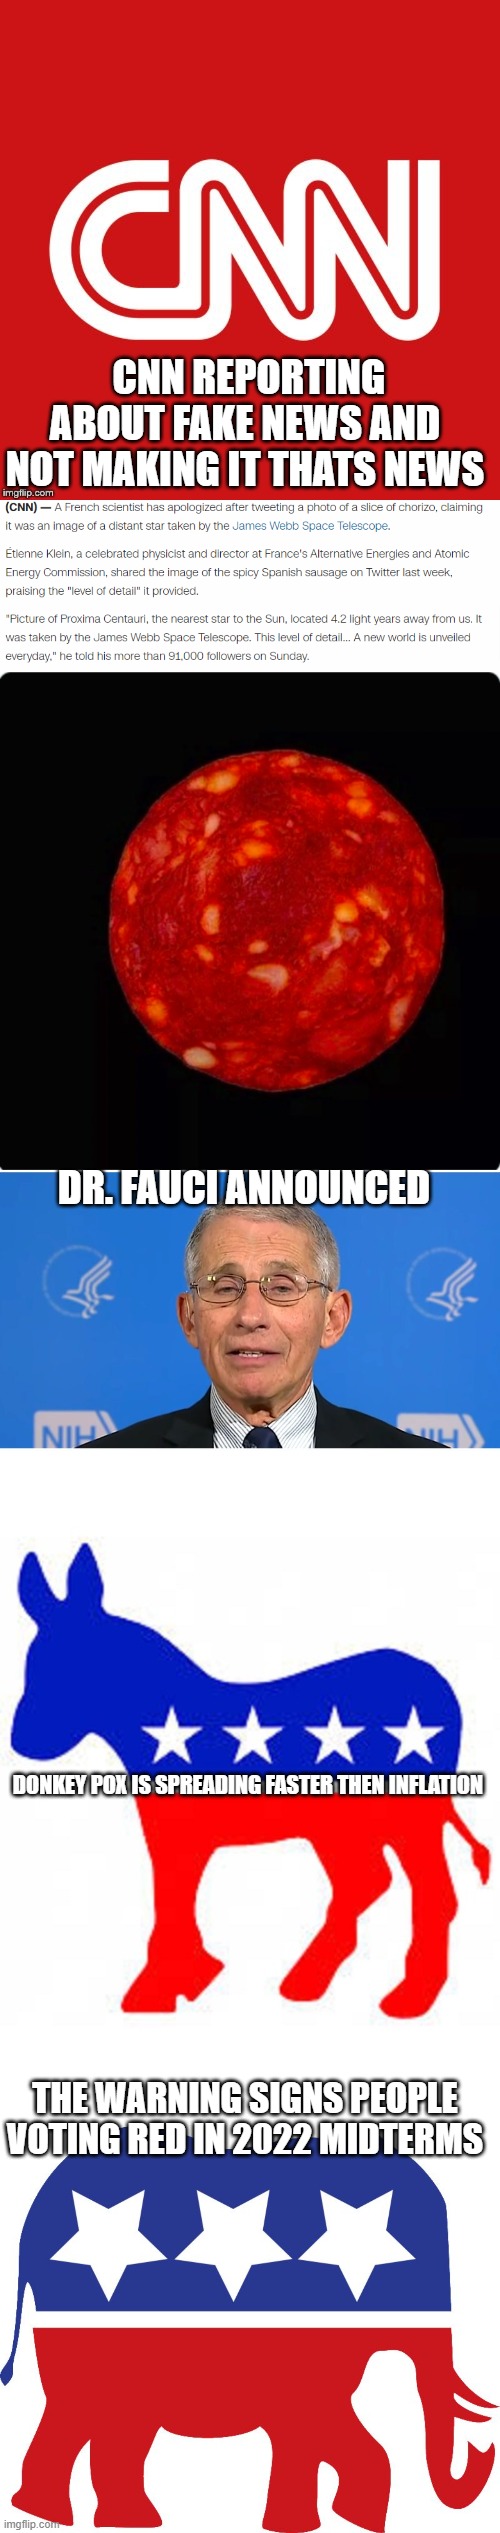 SPACE CHORIZO ATTACKS | CNN REPORTING ABOUT FAKE NEWS AND NOT MAKING IT THATS NEWS; DR. FAUCI ANNOUNCED; DONKEY POX IS SPREADING FASTER THEN INFLATION; THE WARNING SIGNS PEOPLE VOTING RED IN 2022 MIDTERMS | image tagged in cnn very fake news,dr fauci,democrat donkey,gop elephant | made w/ Imgflip meme maker